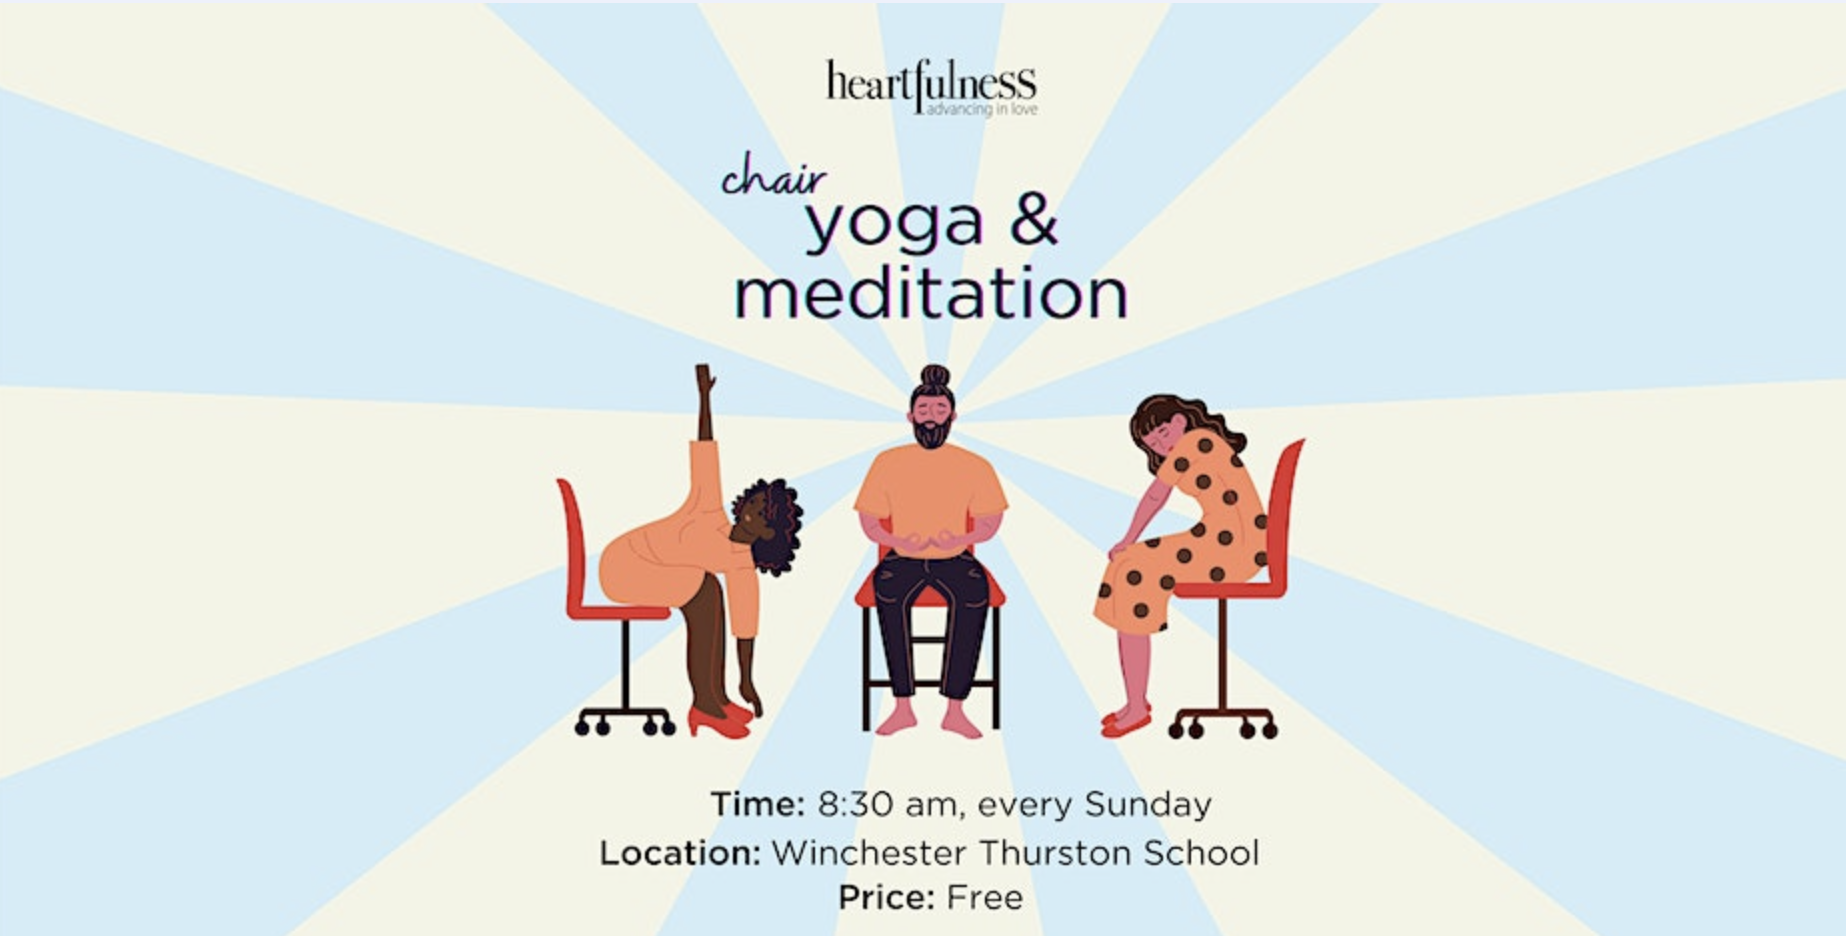 Chair Yoga and Meditation at Winchester Thurston School